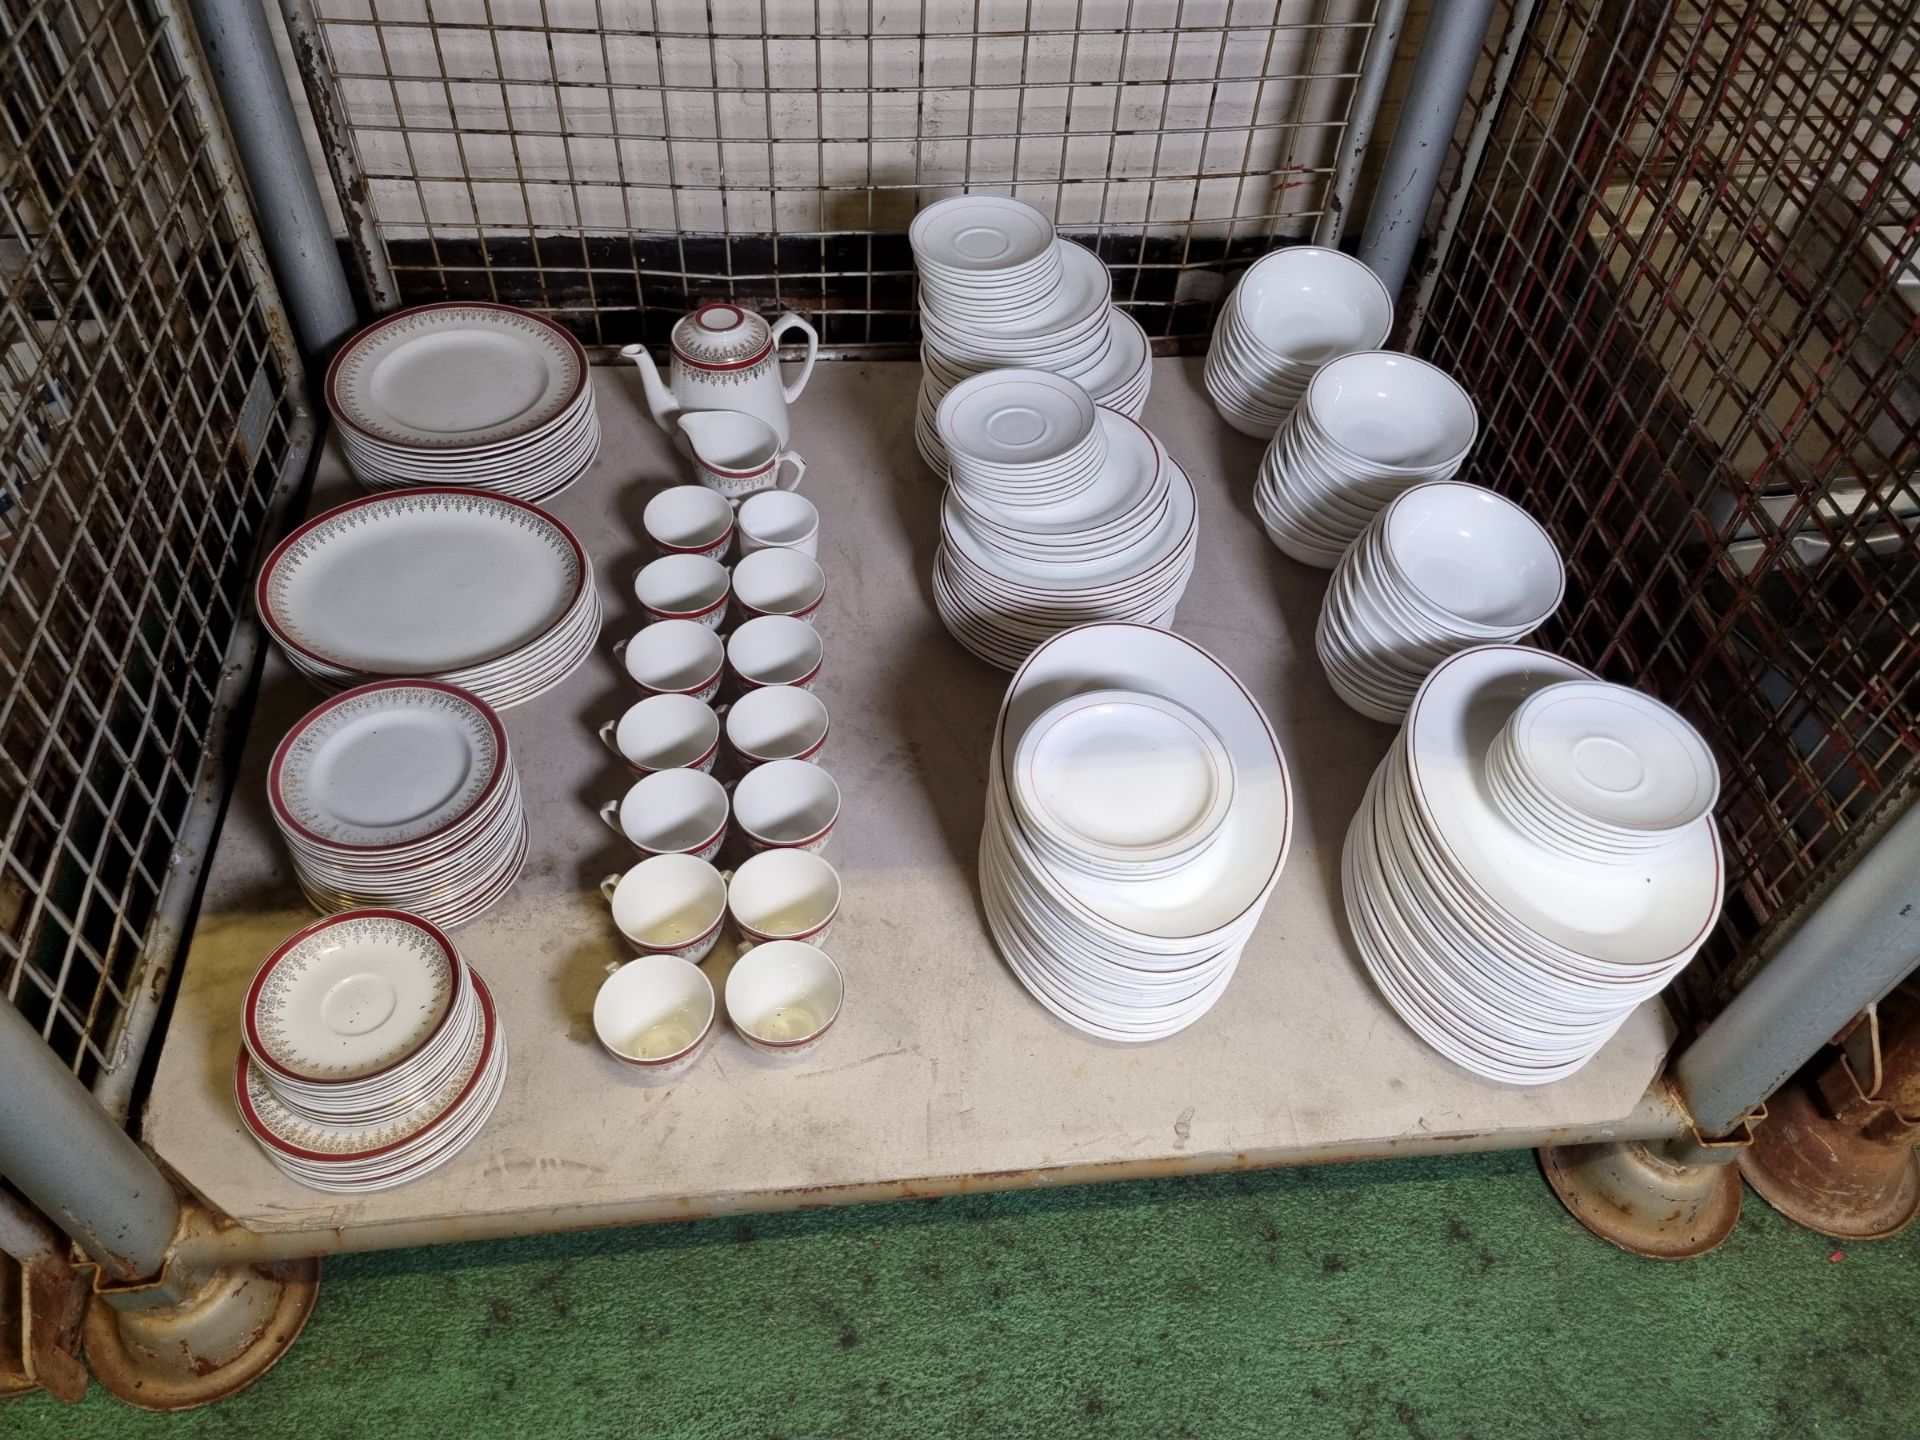 Catering equipment - Myott Royalty and Arcopal France plates, cups, saucers, bowls and teapot - Image 2 of 5